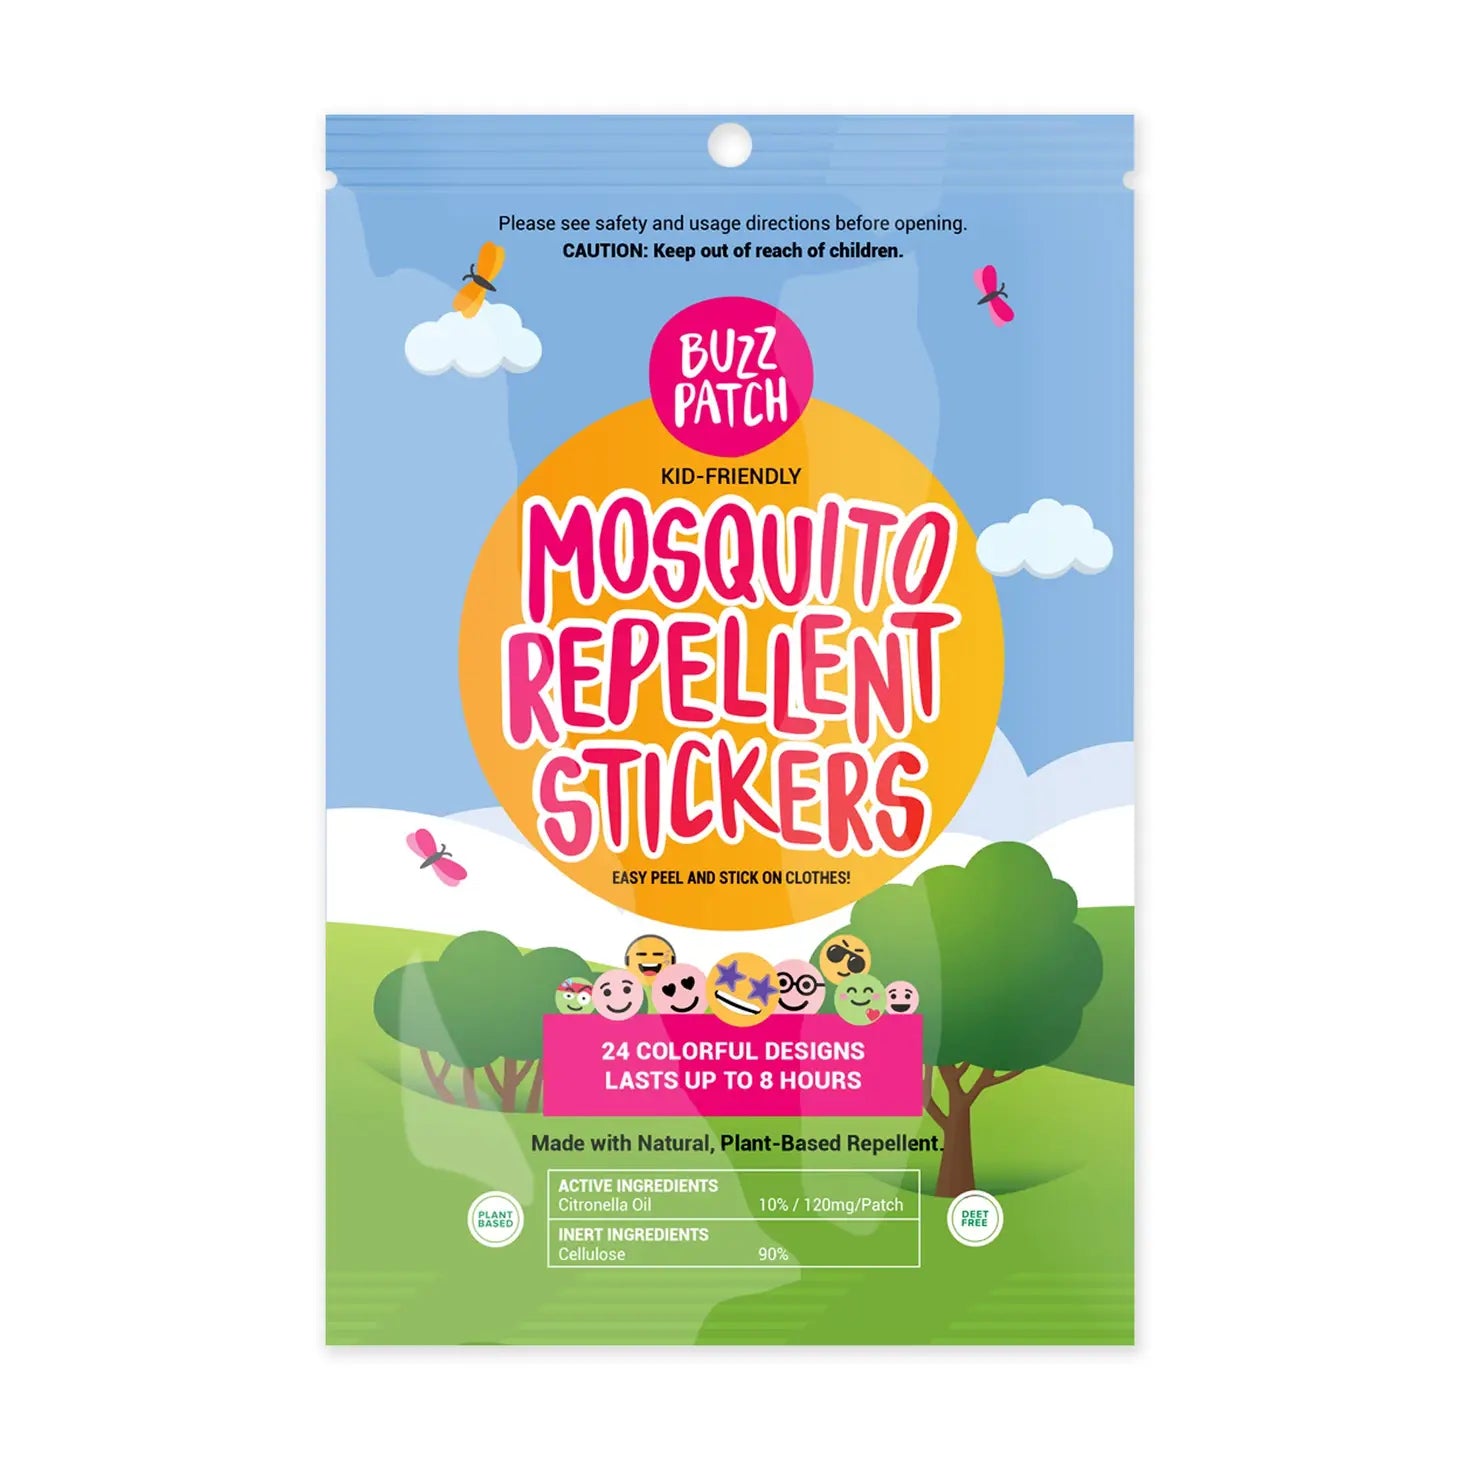 Buzz patch Mosquito repellent stickers